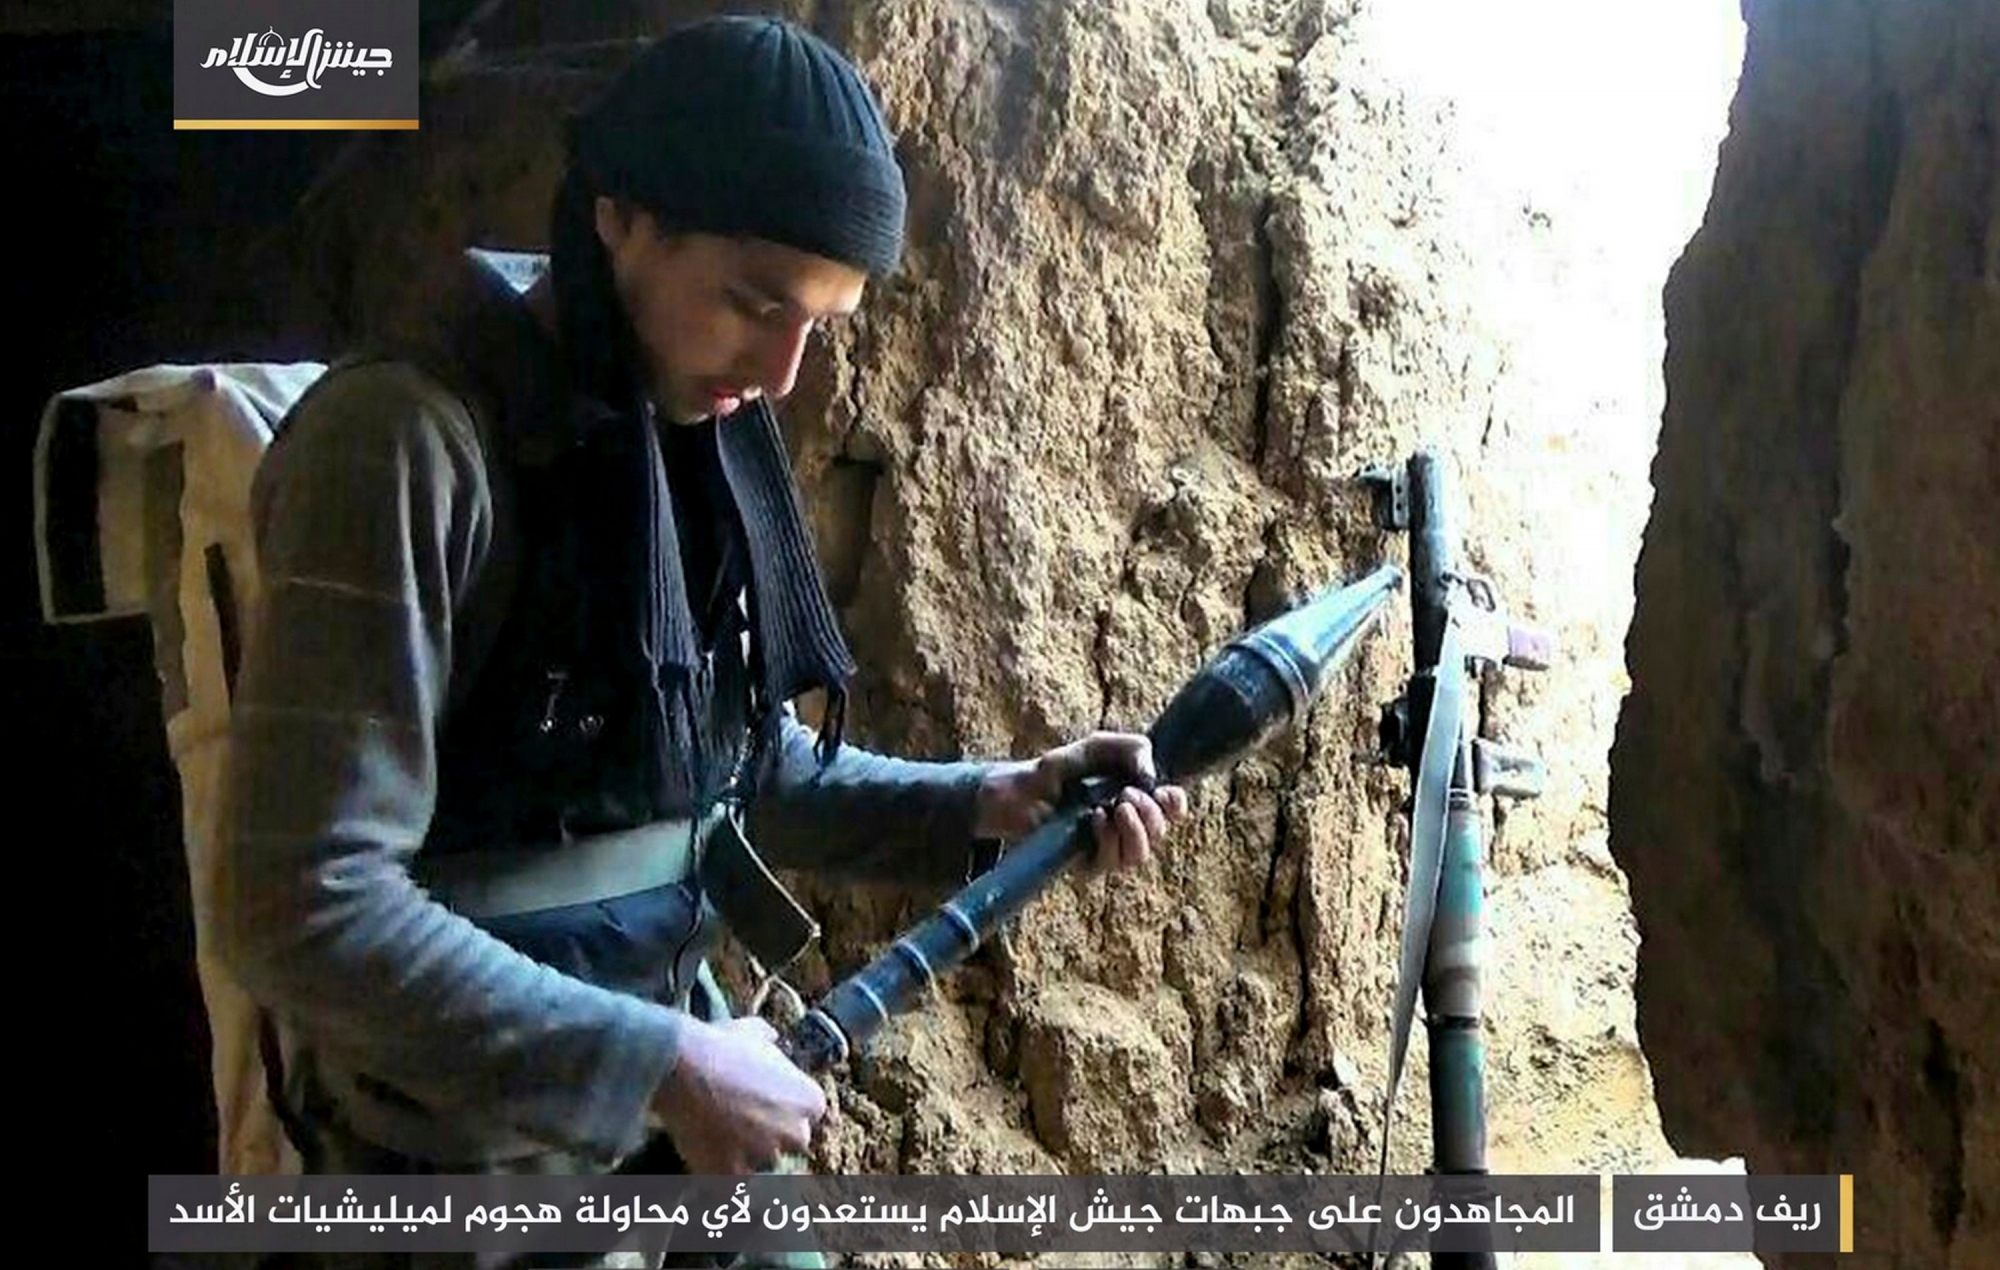 This photo posted Tuesday, Feb 20, 2018, by the Syrian insurgent group Army of Islam, shows a fighter with the Army of Islam rebel group, as he prepares a rocket propelled grenade in the suburbs of the Syrian capital Damascus. Many of the fighters entrenched in the Damascus suburb of eastern Ghouta are originally from the area and move around using an elaborate network of underground tunnels, giving them an advantage against President Bashar Assad's forces and their allies. Arabic reads, "Damascus Suburbs: Holy warriors on the fronts of the Army of Islam getting ready for any attempt by Assad's military to launch an attack." (Army of Islam, via AP) Syria Ghouta Fighters